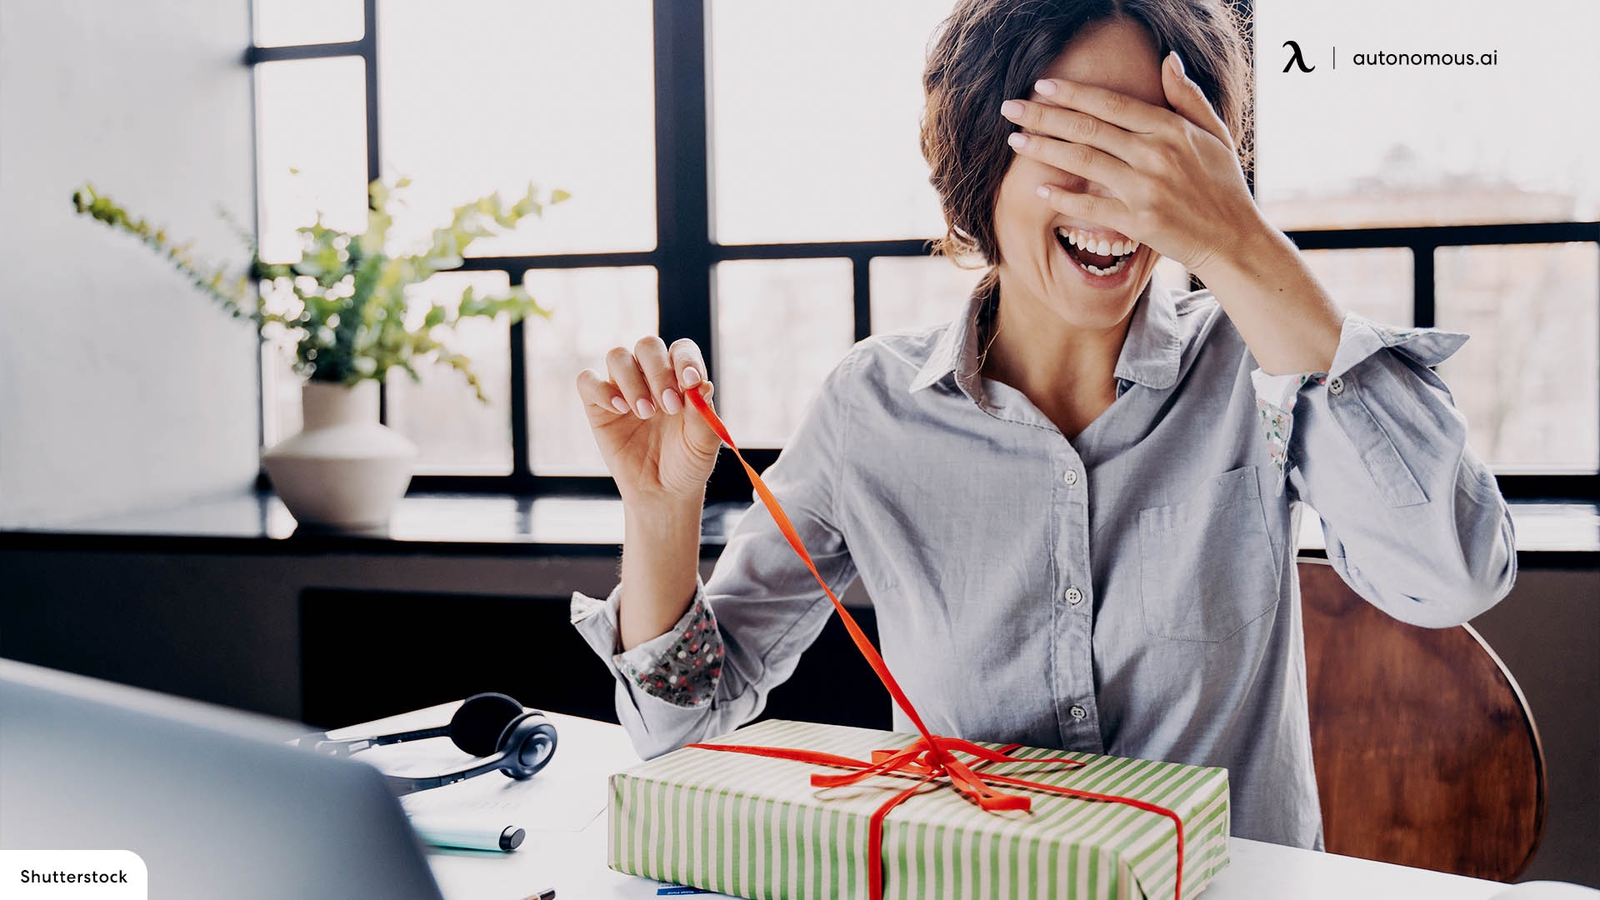 Best Ideas of Christmas Gifts for Remote Employees